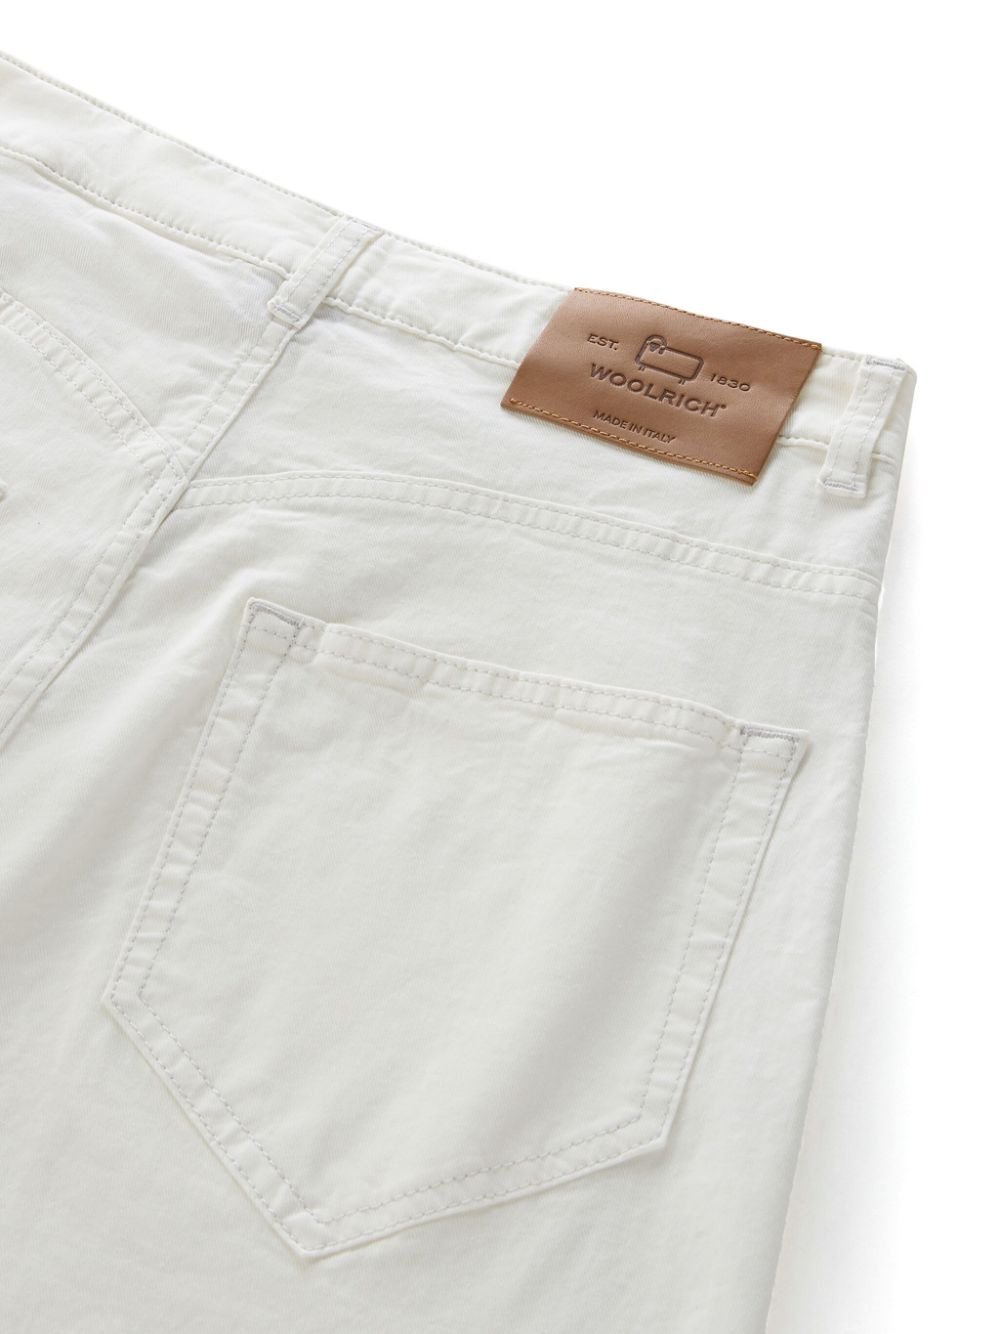 Woolrich Jeans White